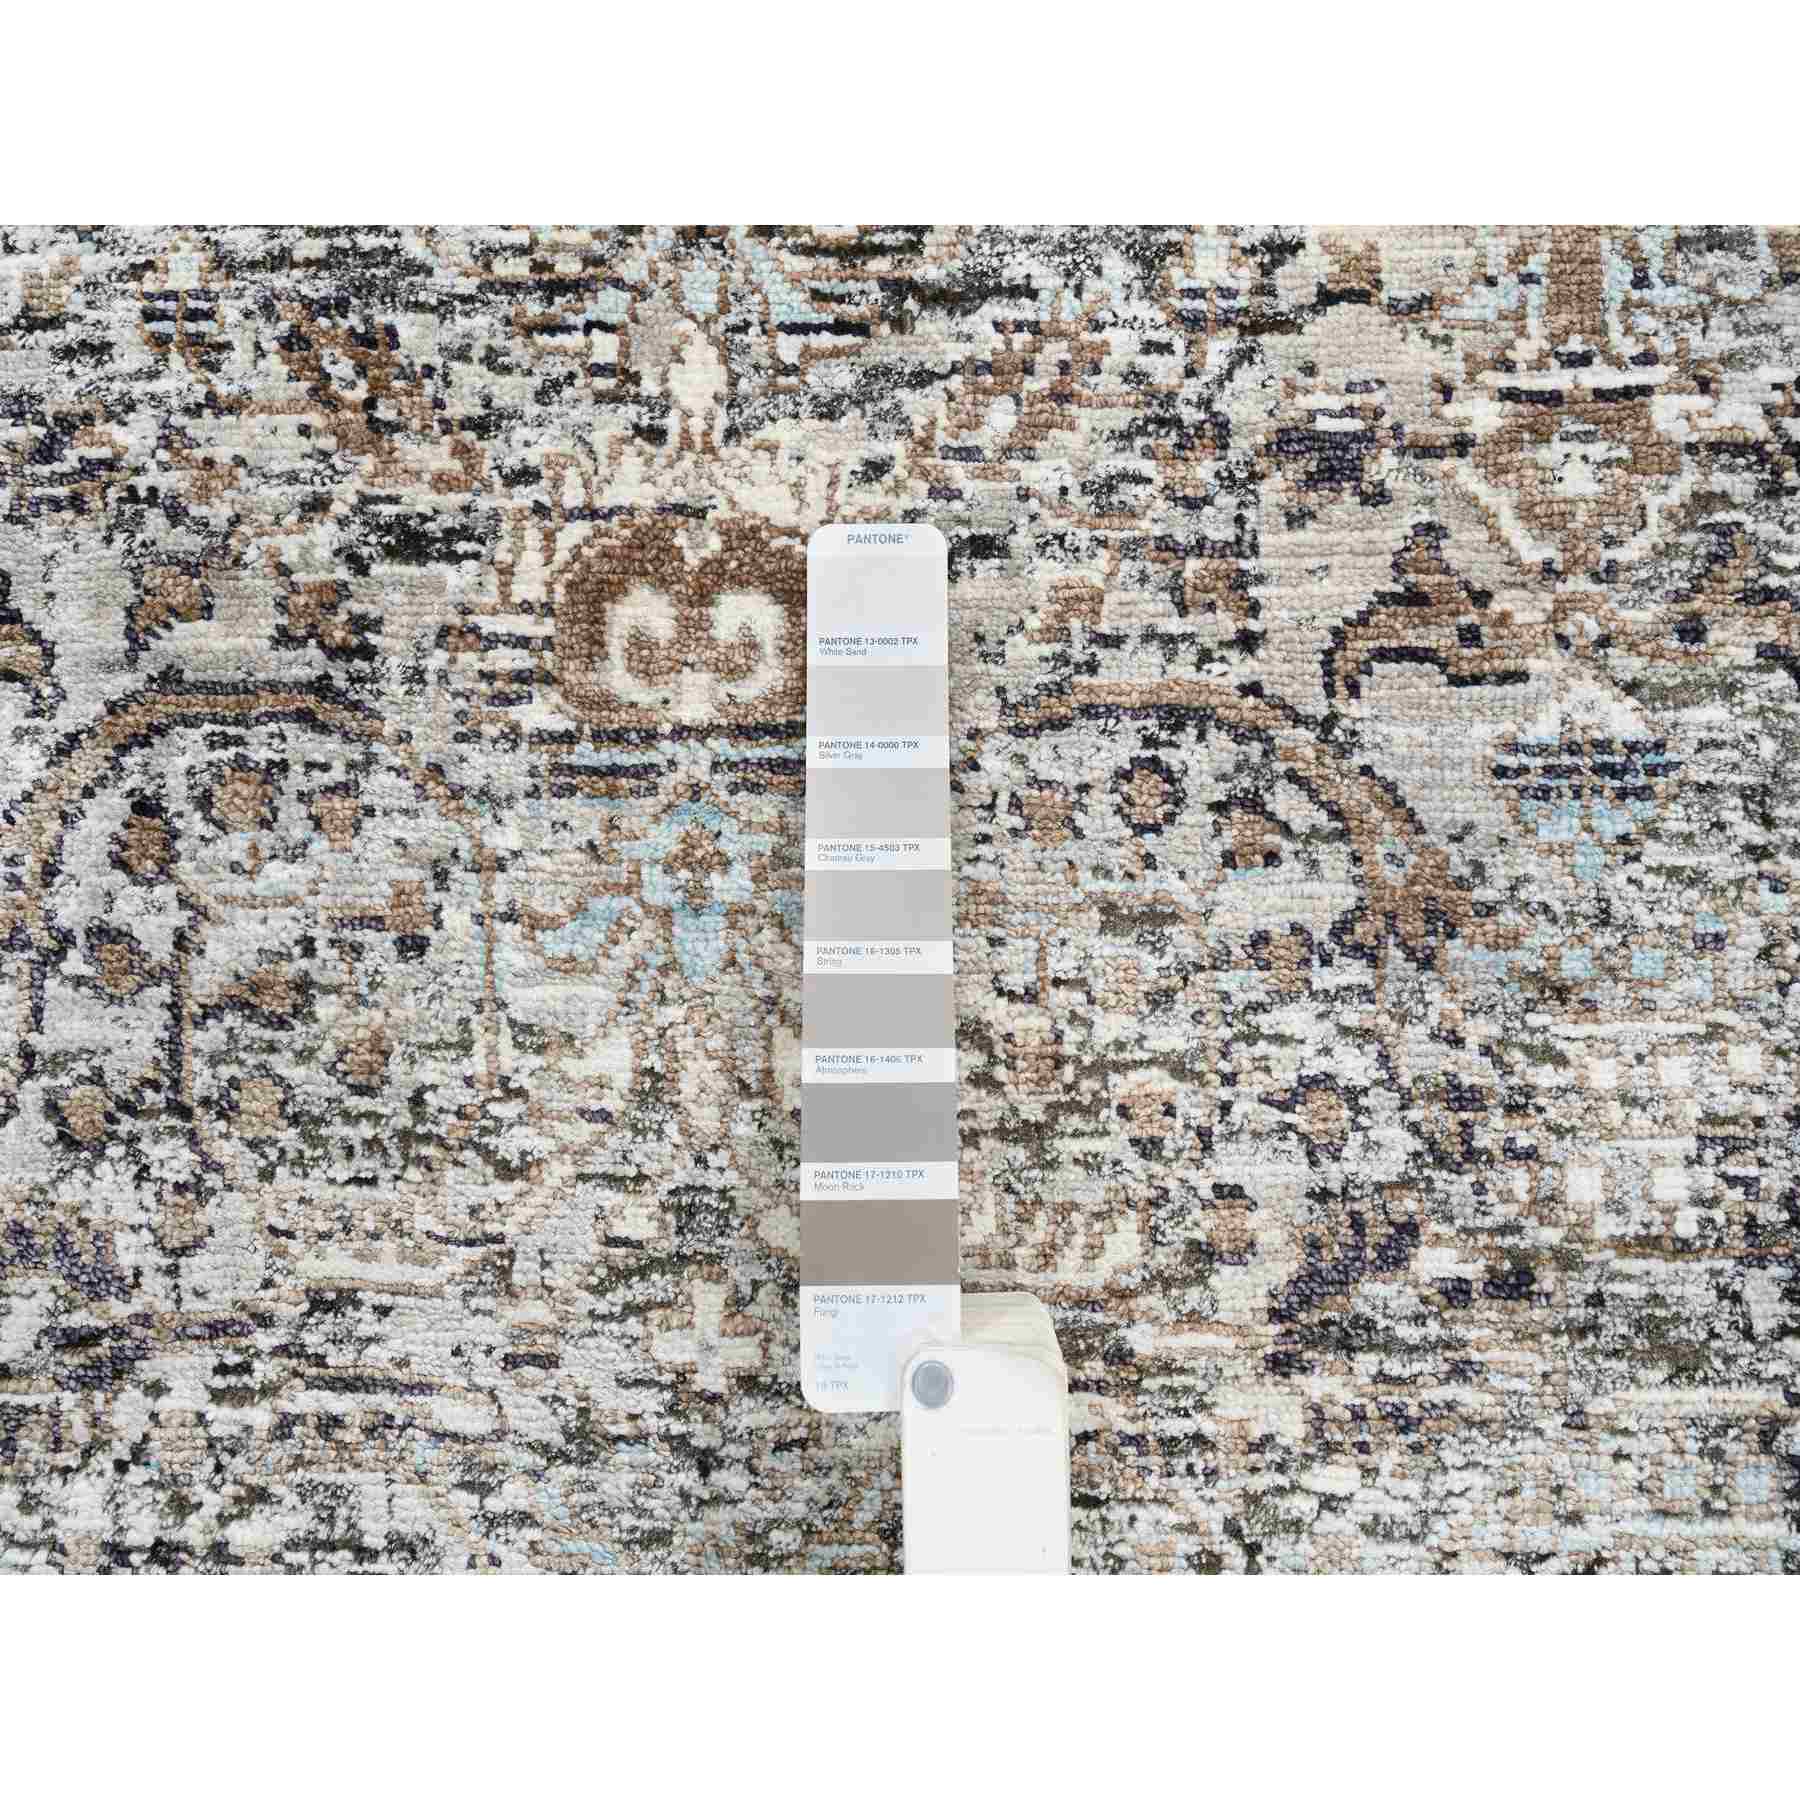 Transitional-Hand-Knotted-Rug-322120